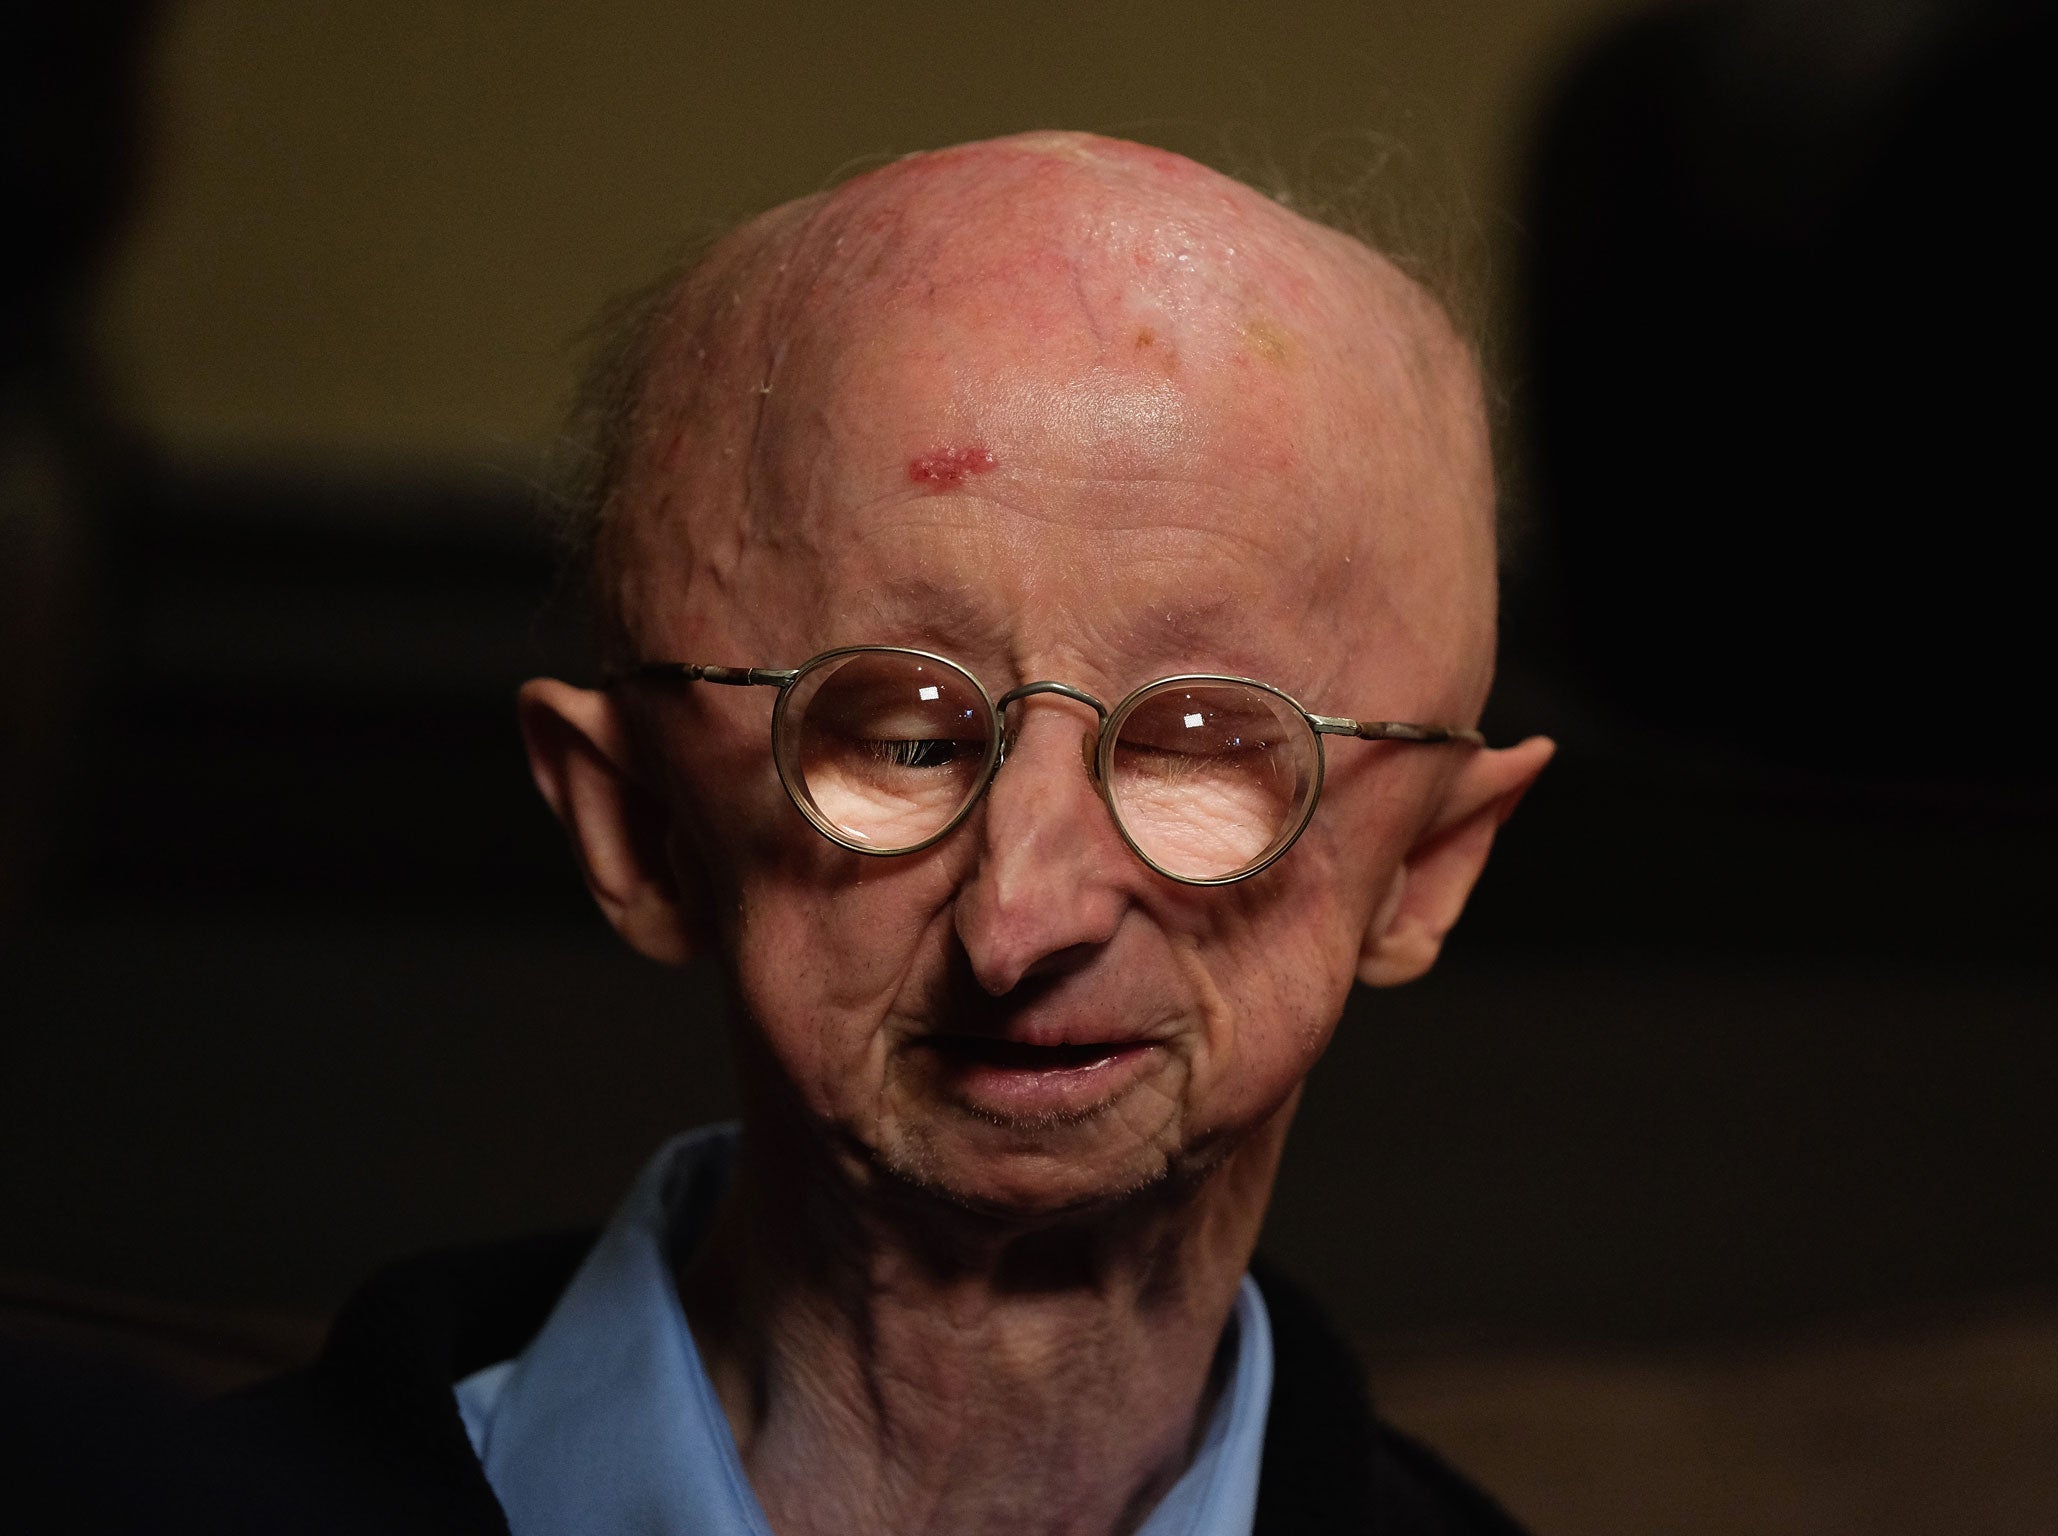 Alan Barnes, who assaulted outside his home